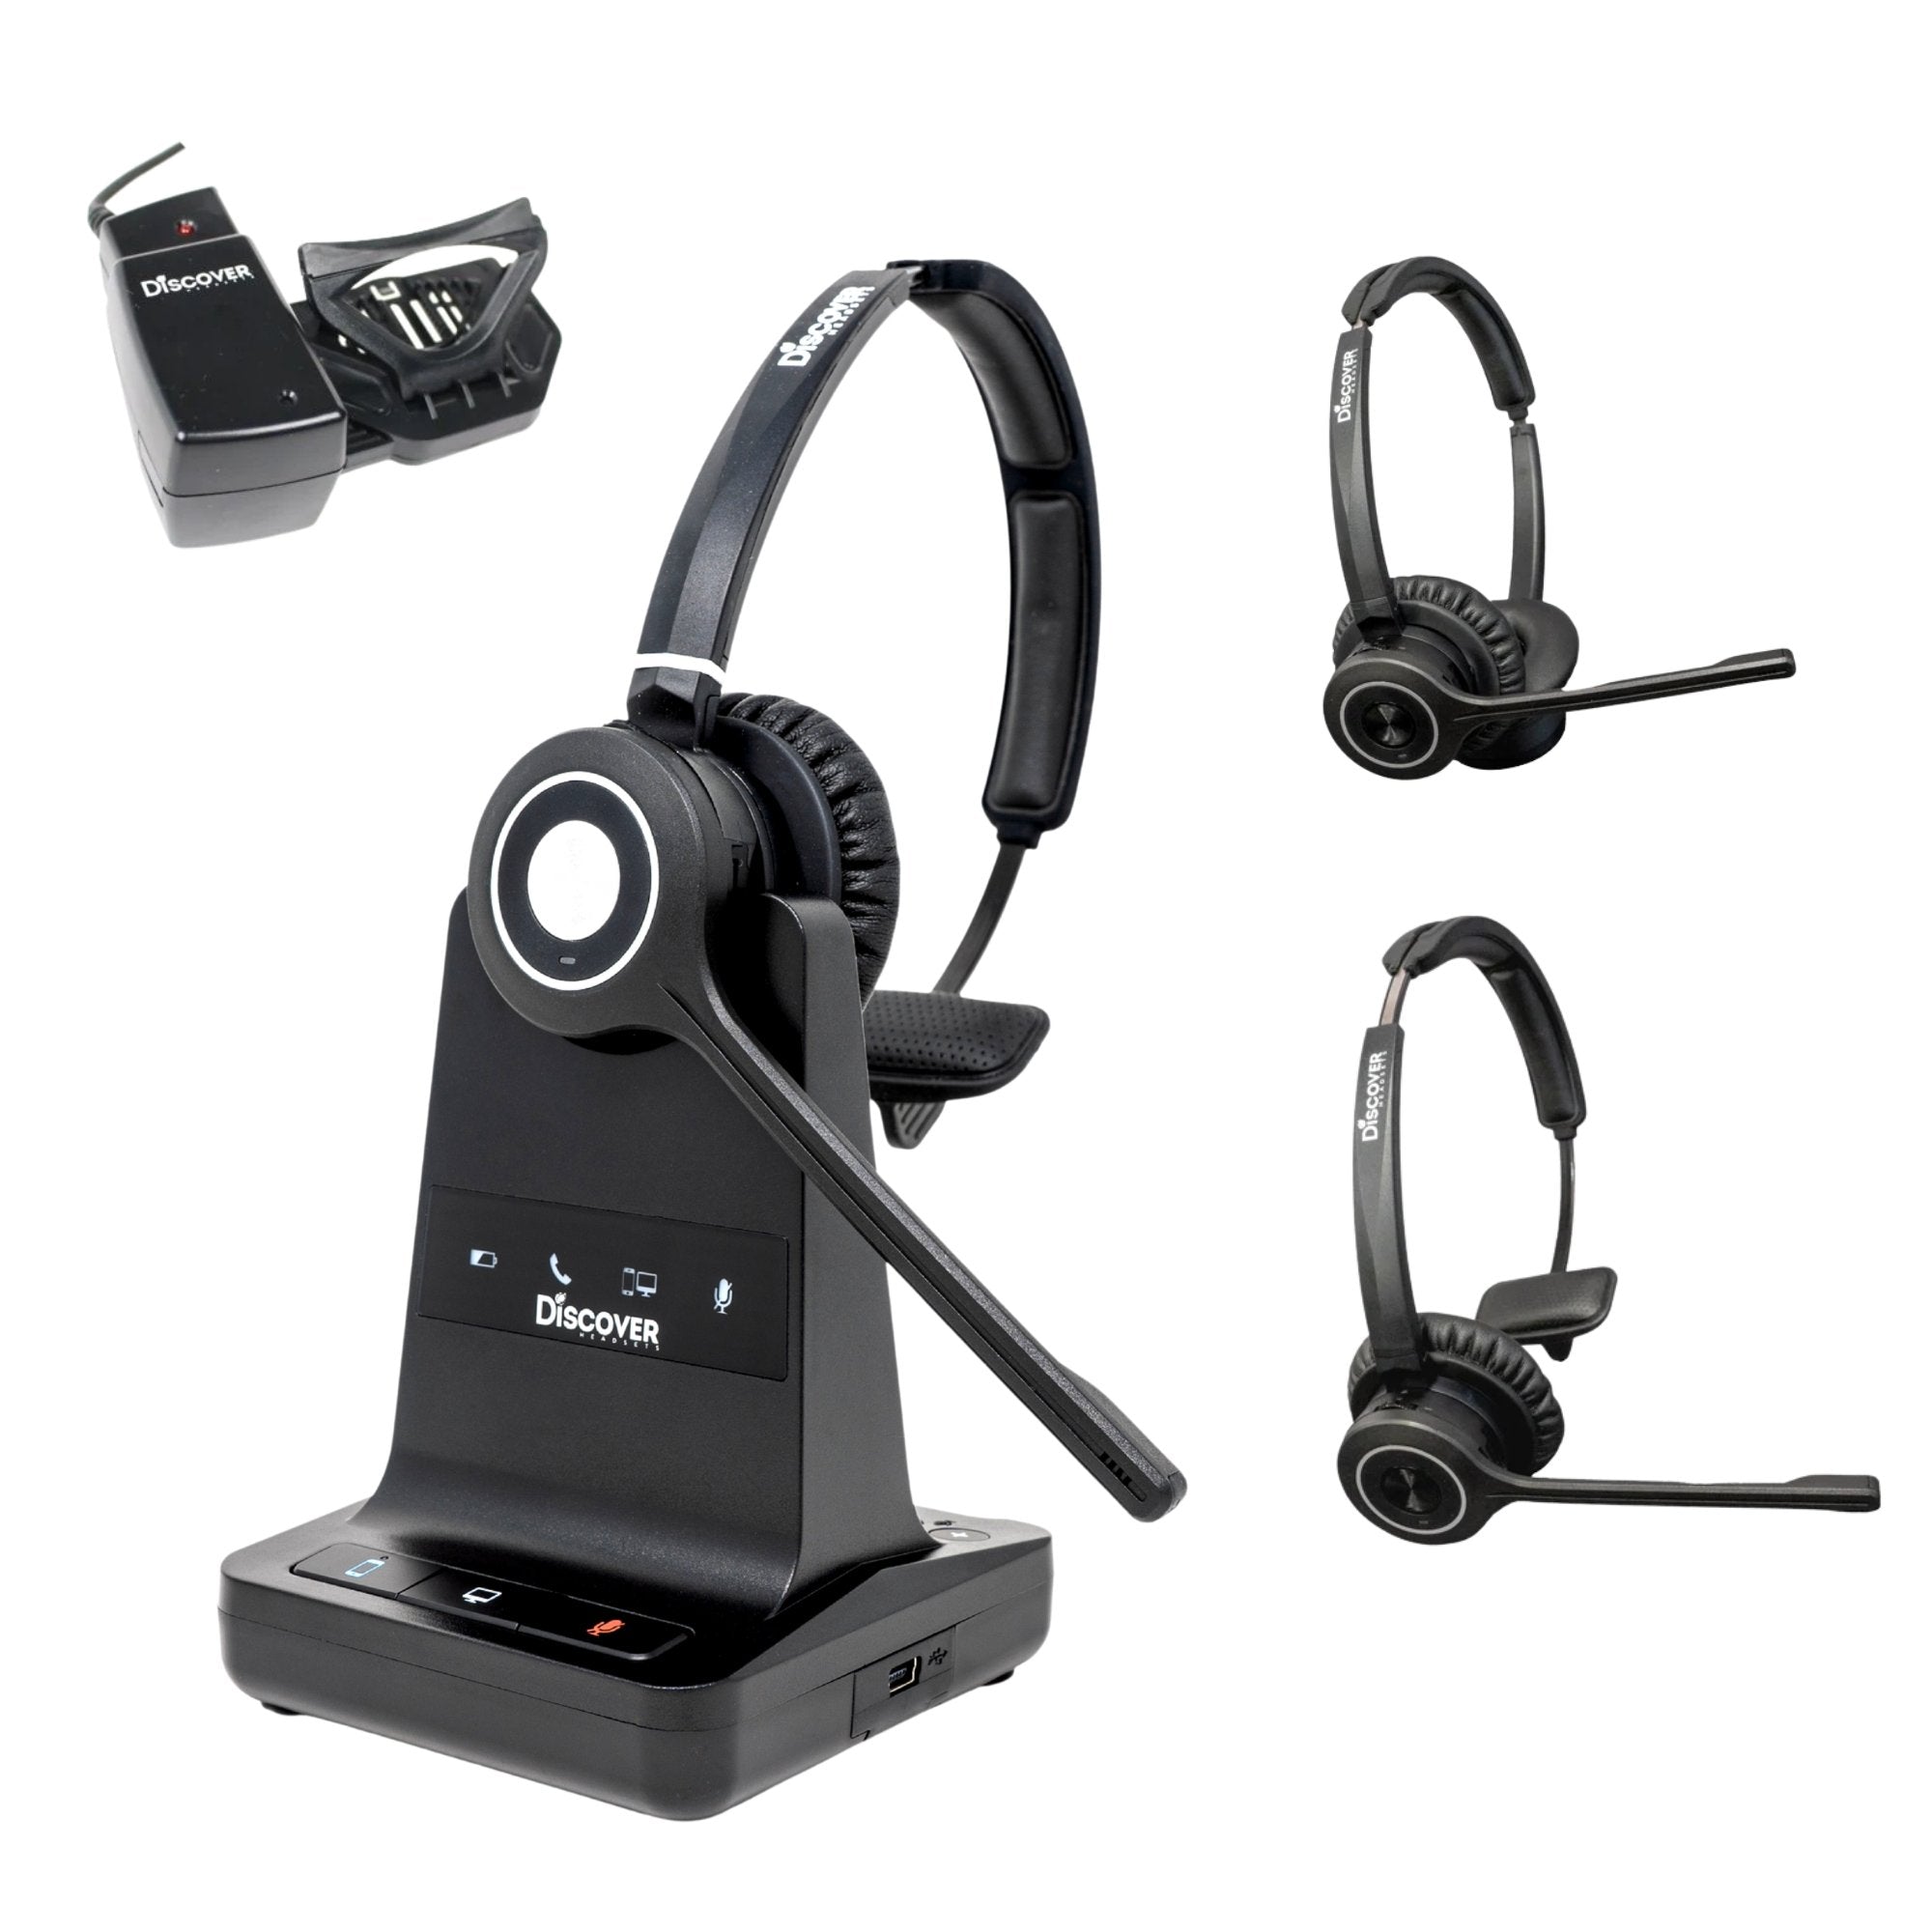 Discover Adapt 30 DECT Wireless Headset for Desk Phone & Computer - Headset Advisor